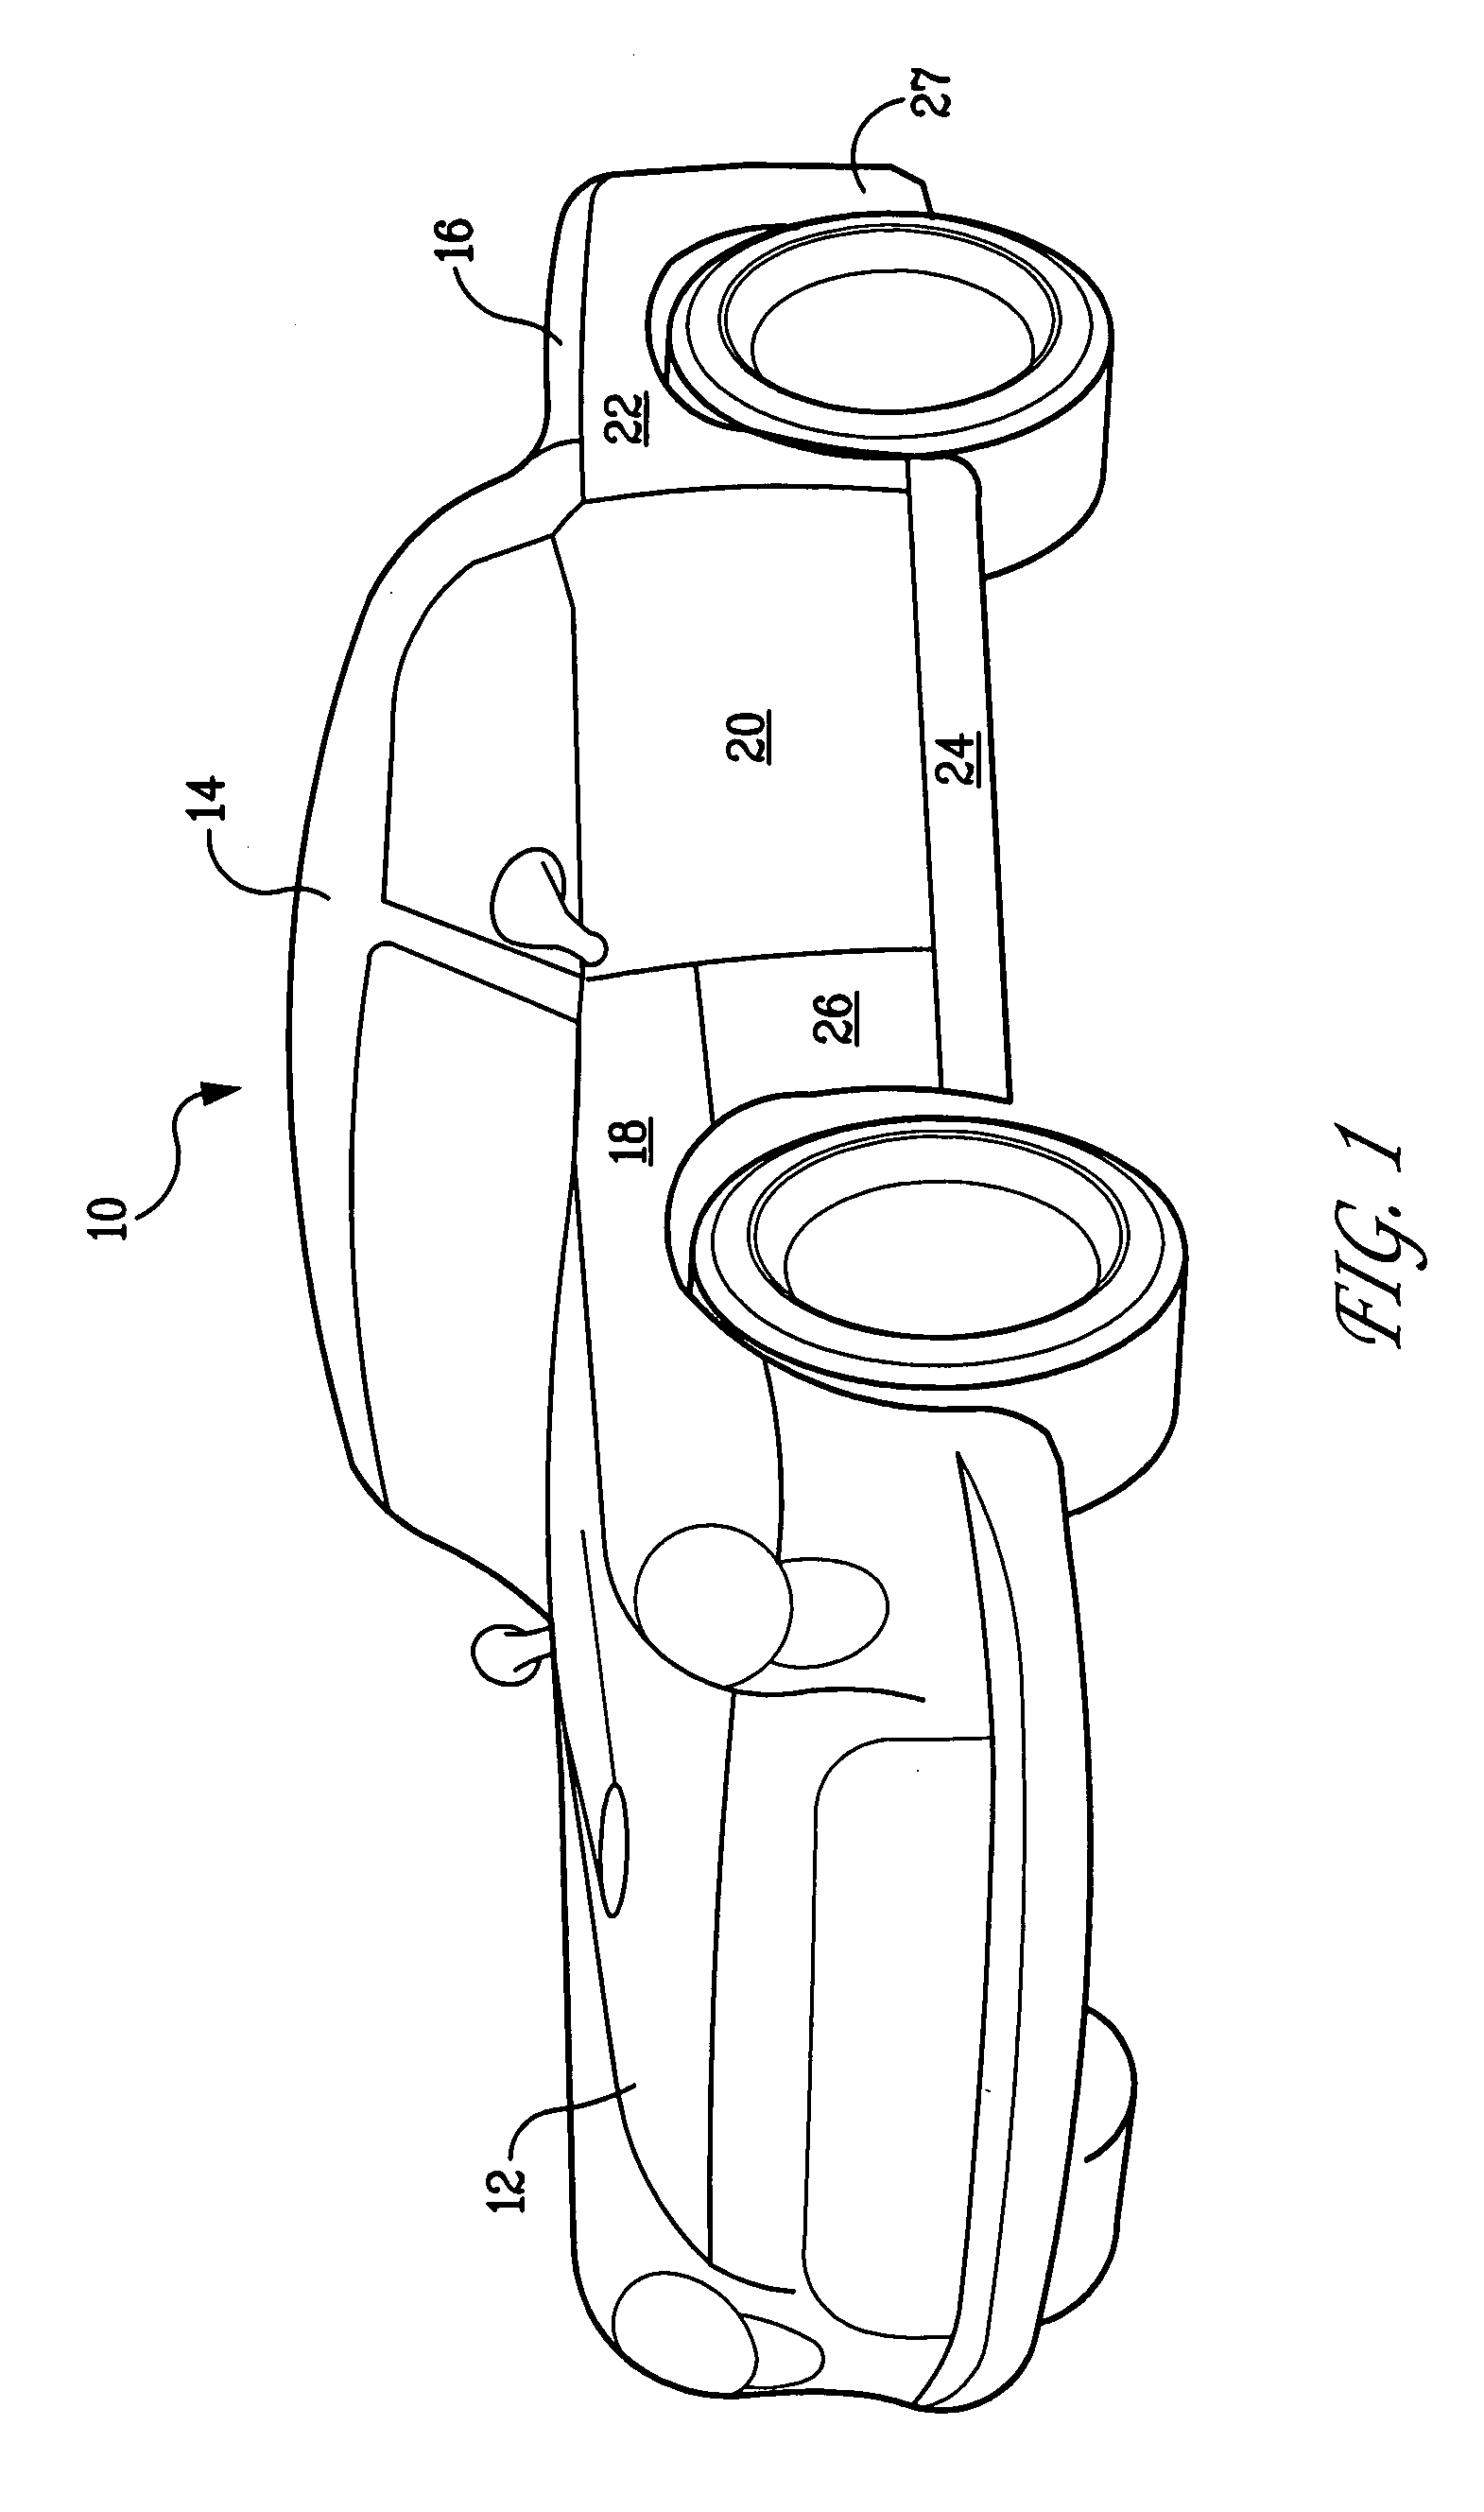 Paint system and method of painting fiber reinforced polypropylene composite components